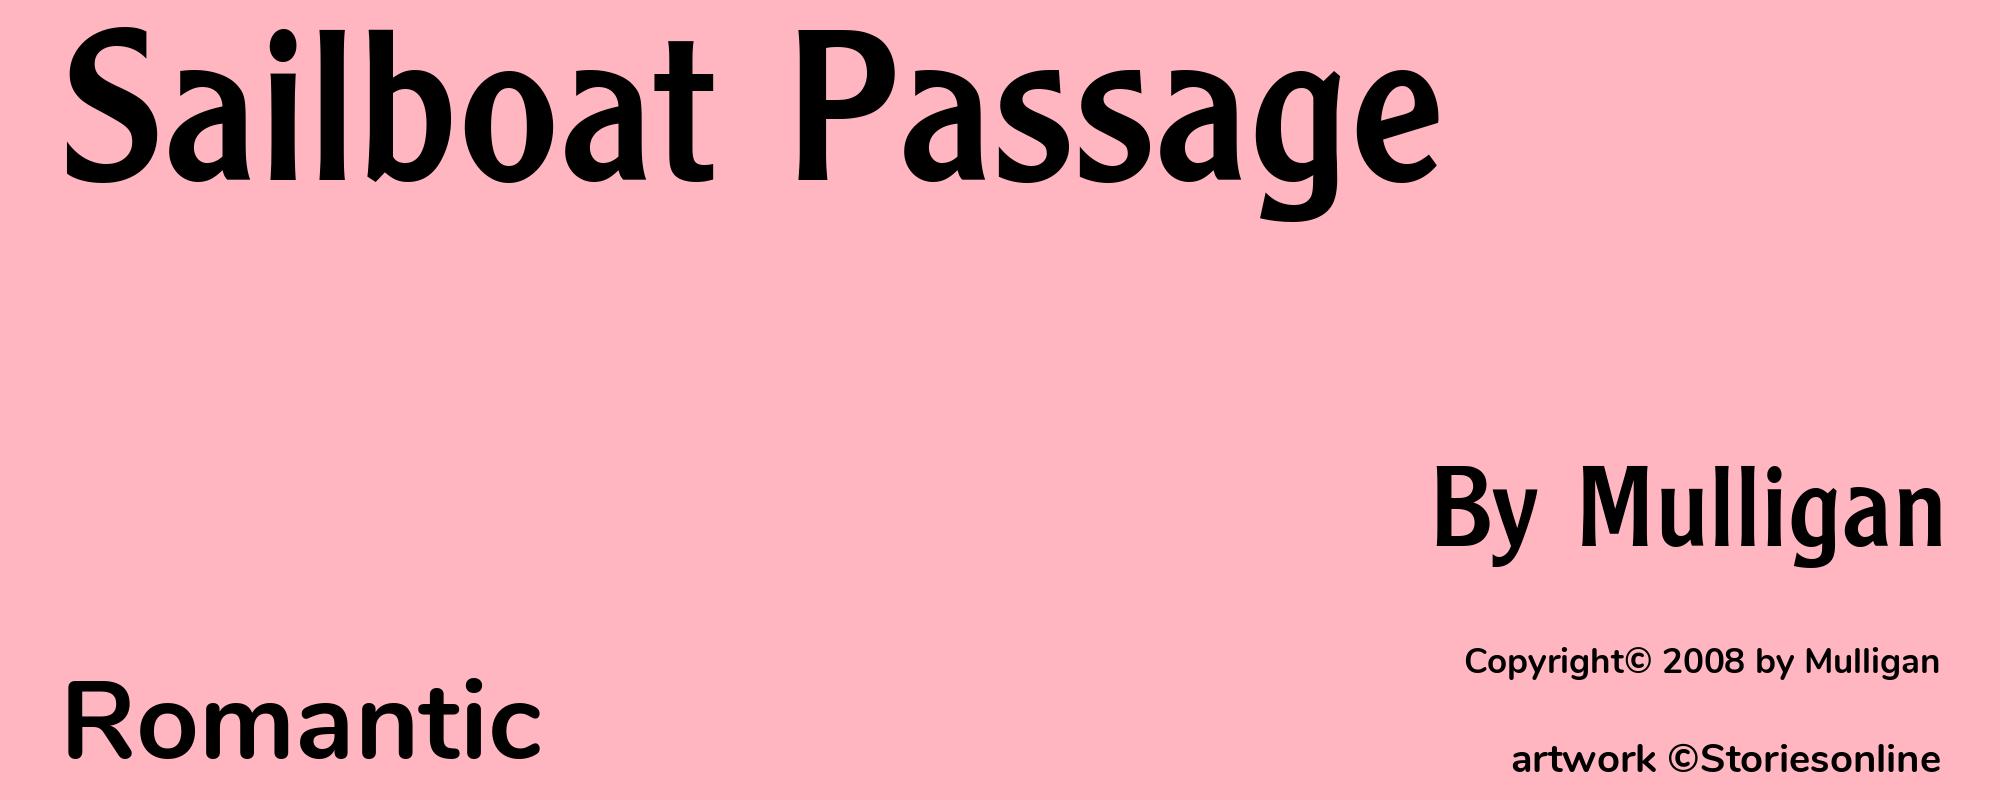 Sailboat Passage - Cover